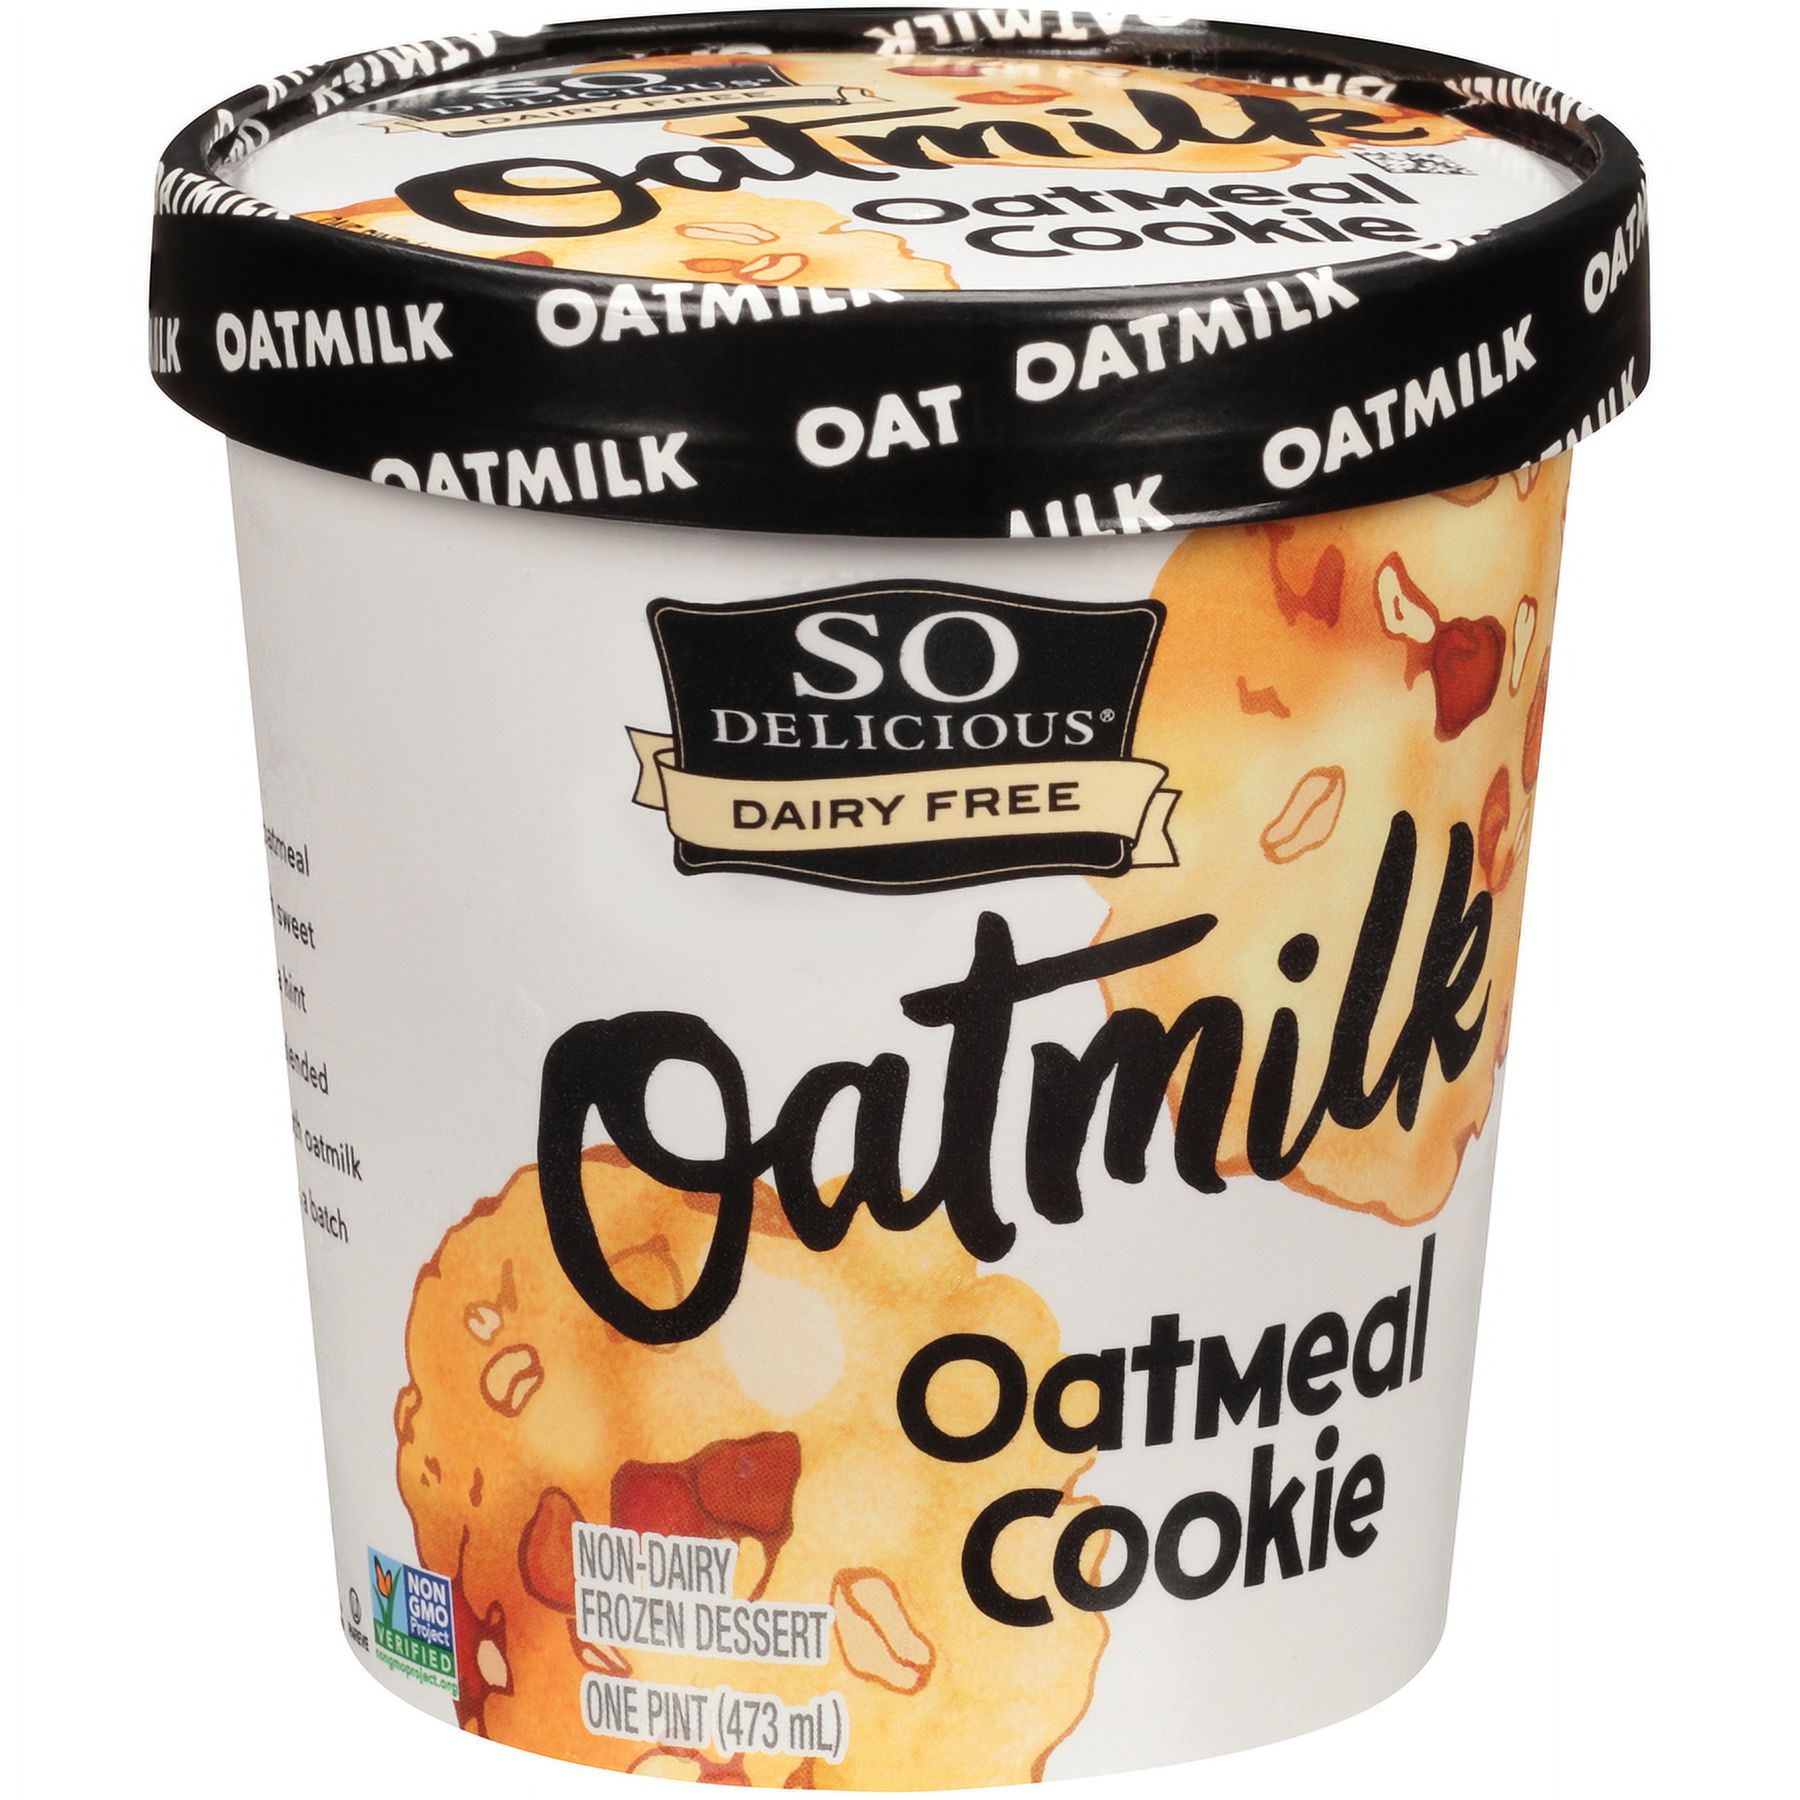 So Delicious® Dairy Free Oatmilk Oatmeal Cookie Non-Dairy Frozen Dessert 1 pt. Tub - image 2 of 5